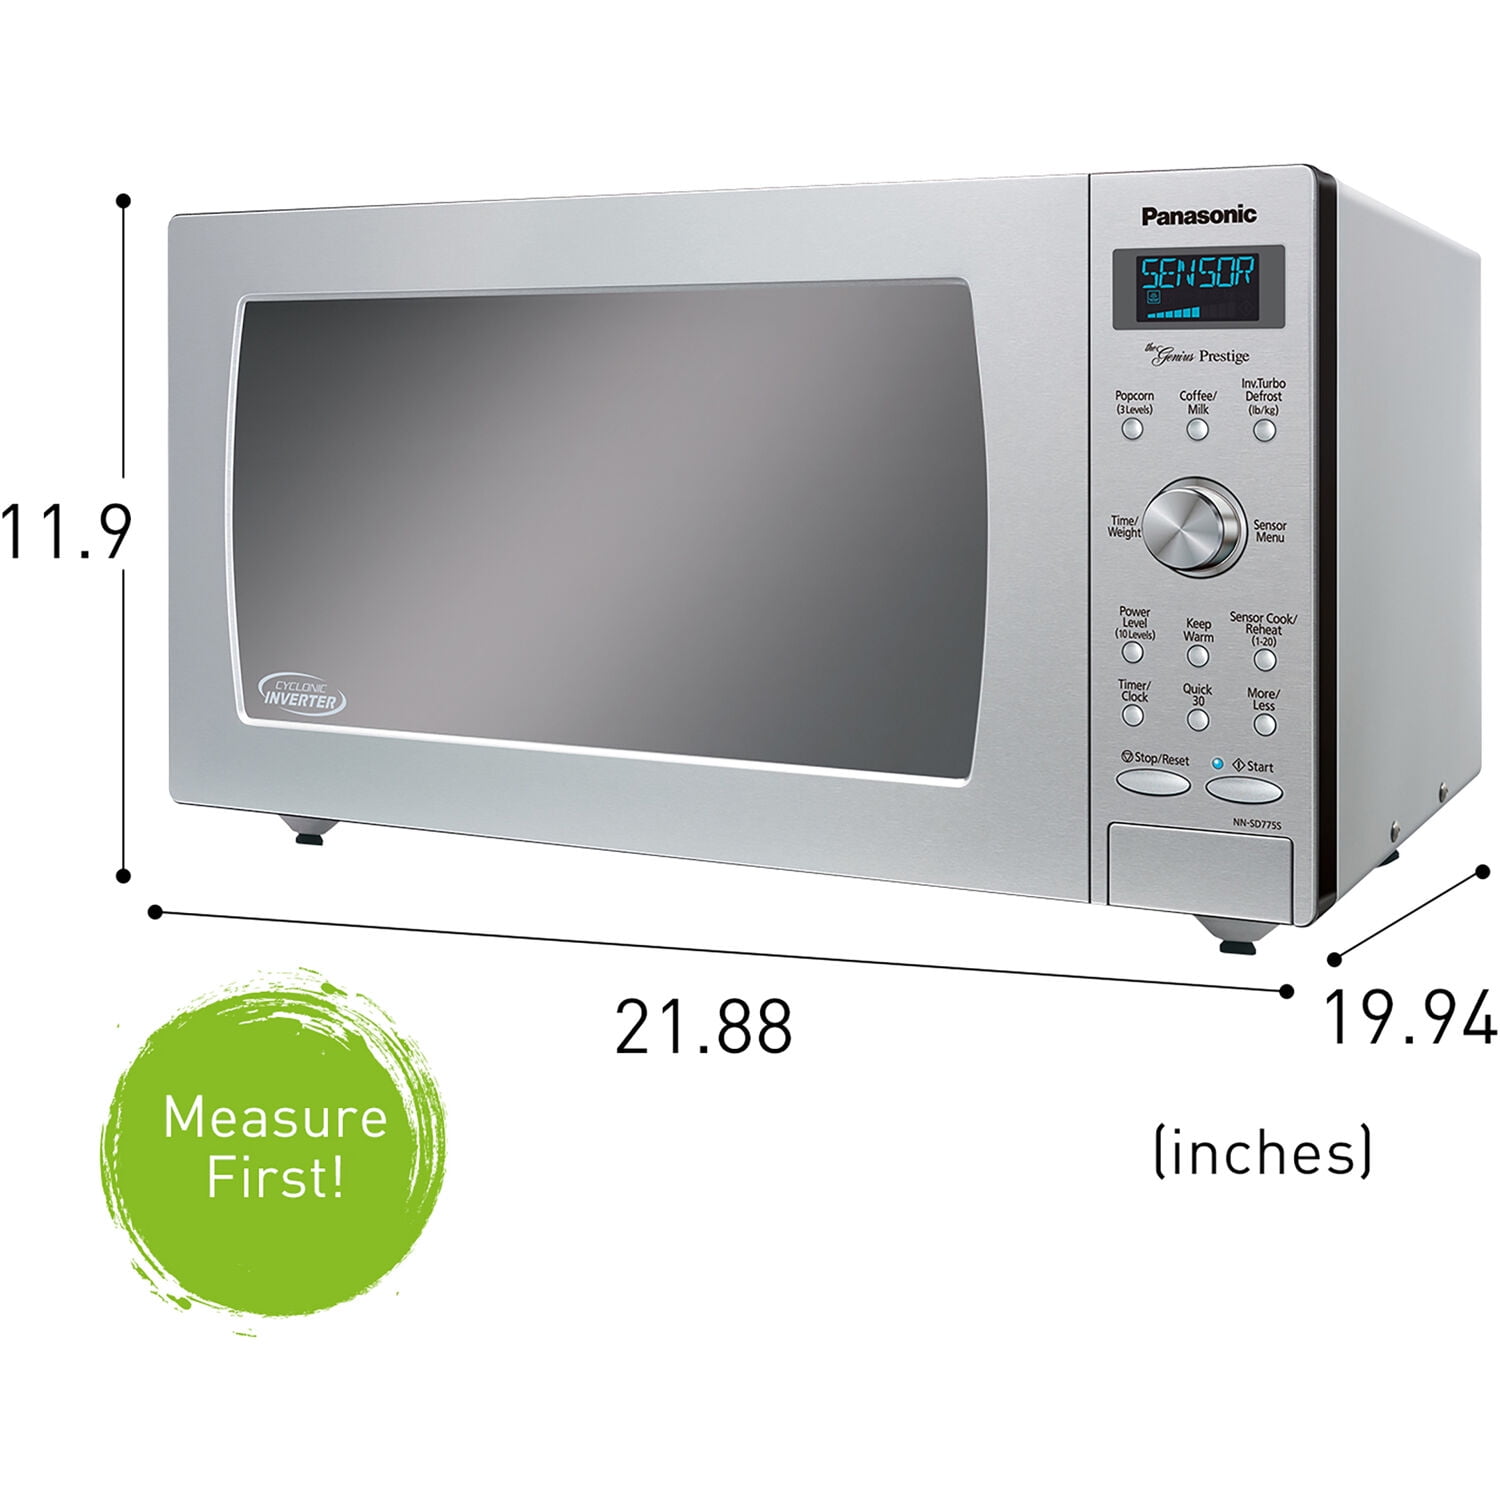 Ft Built-In/Countertop Cyclonic Wave Microwave Oven w/Inverter Technology Stainless Steel Panasonic 1.6 Cu 